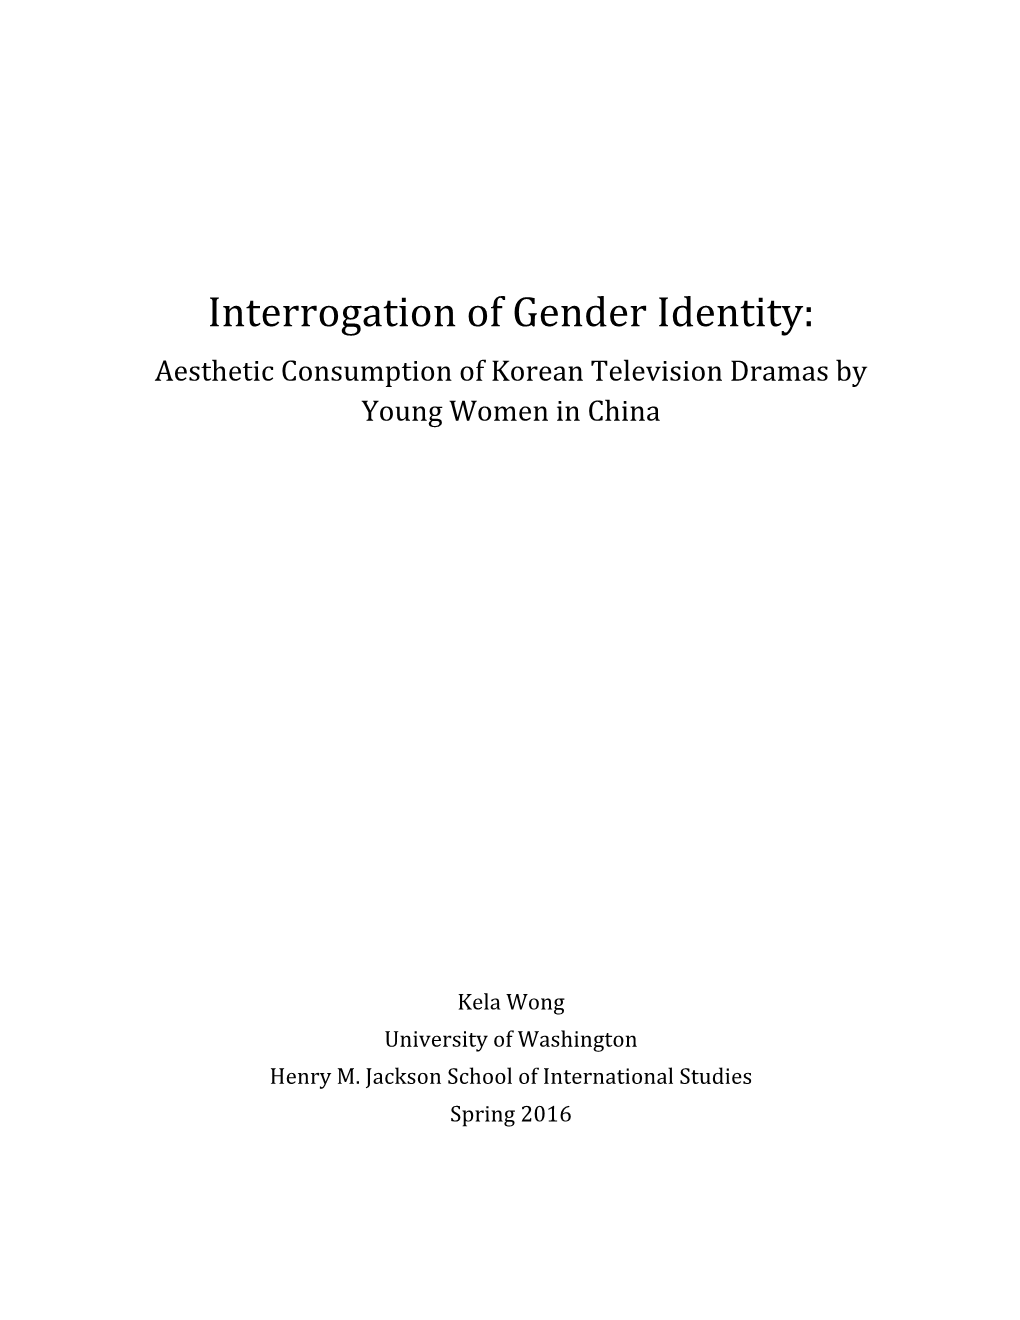 Interrogation of Gender Identity: Aesthetic Consumption of Korean Television Dramas by Young Women in China